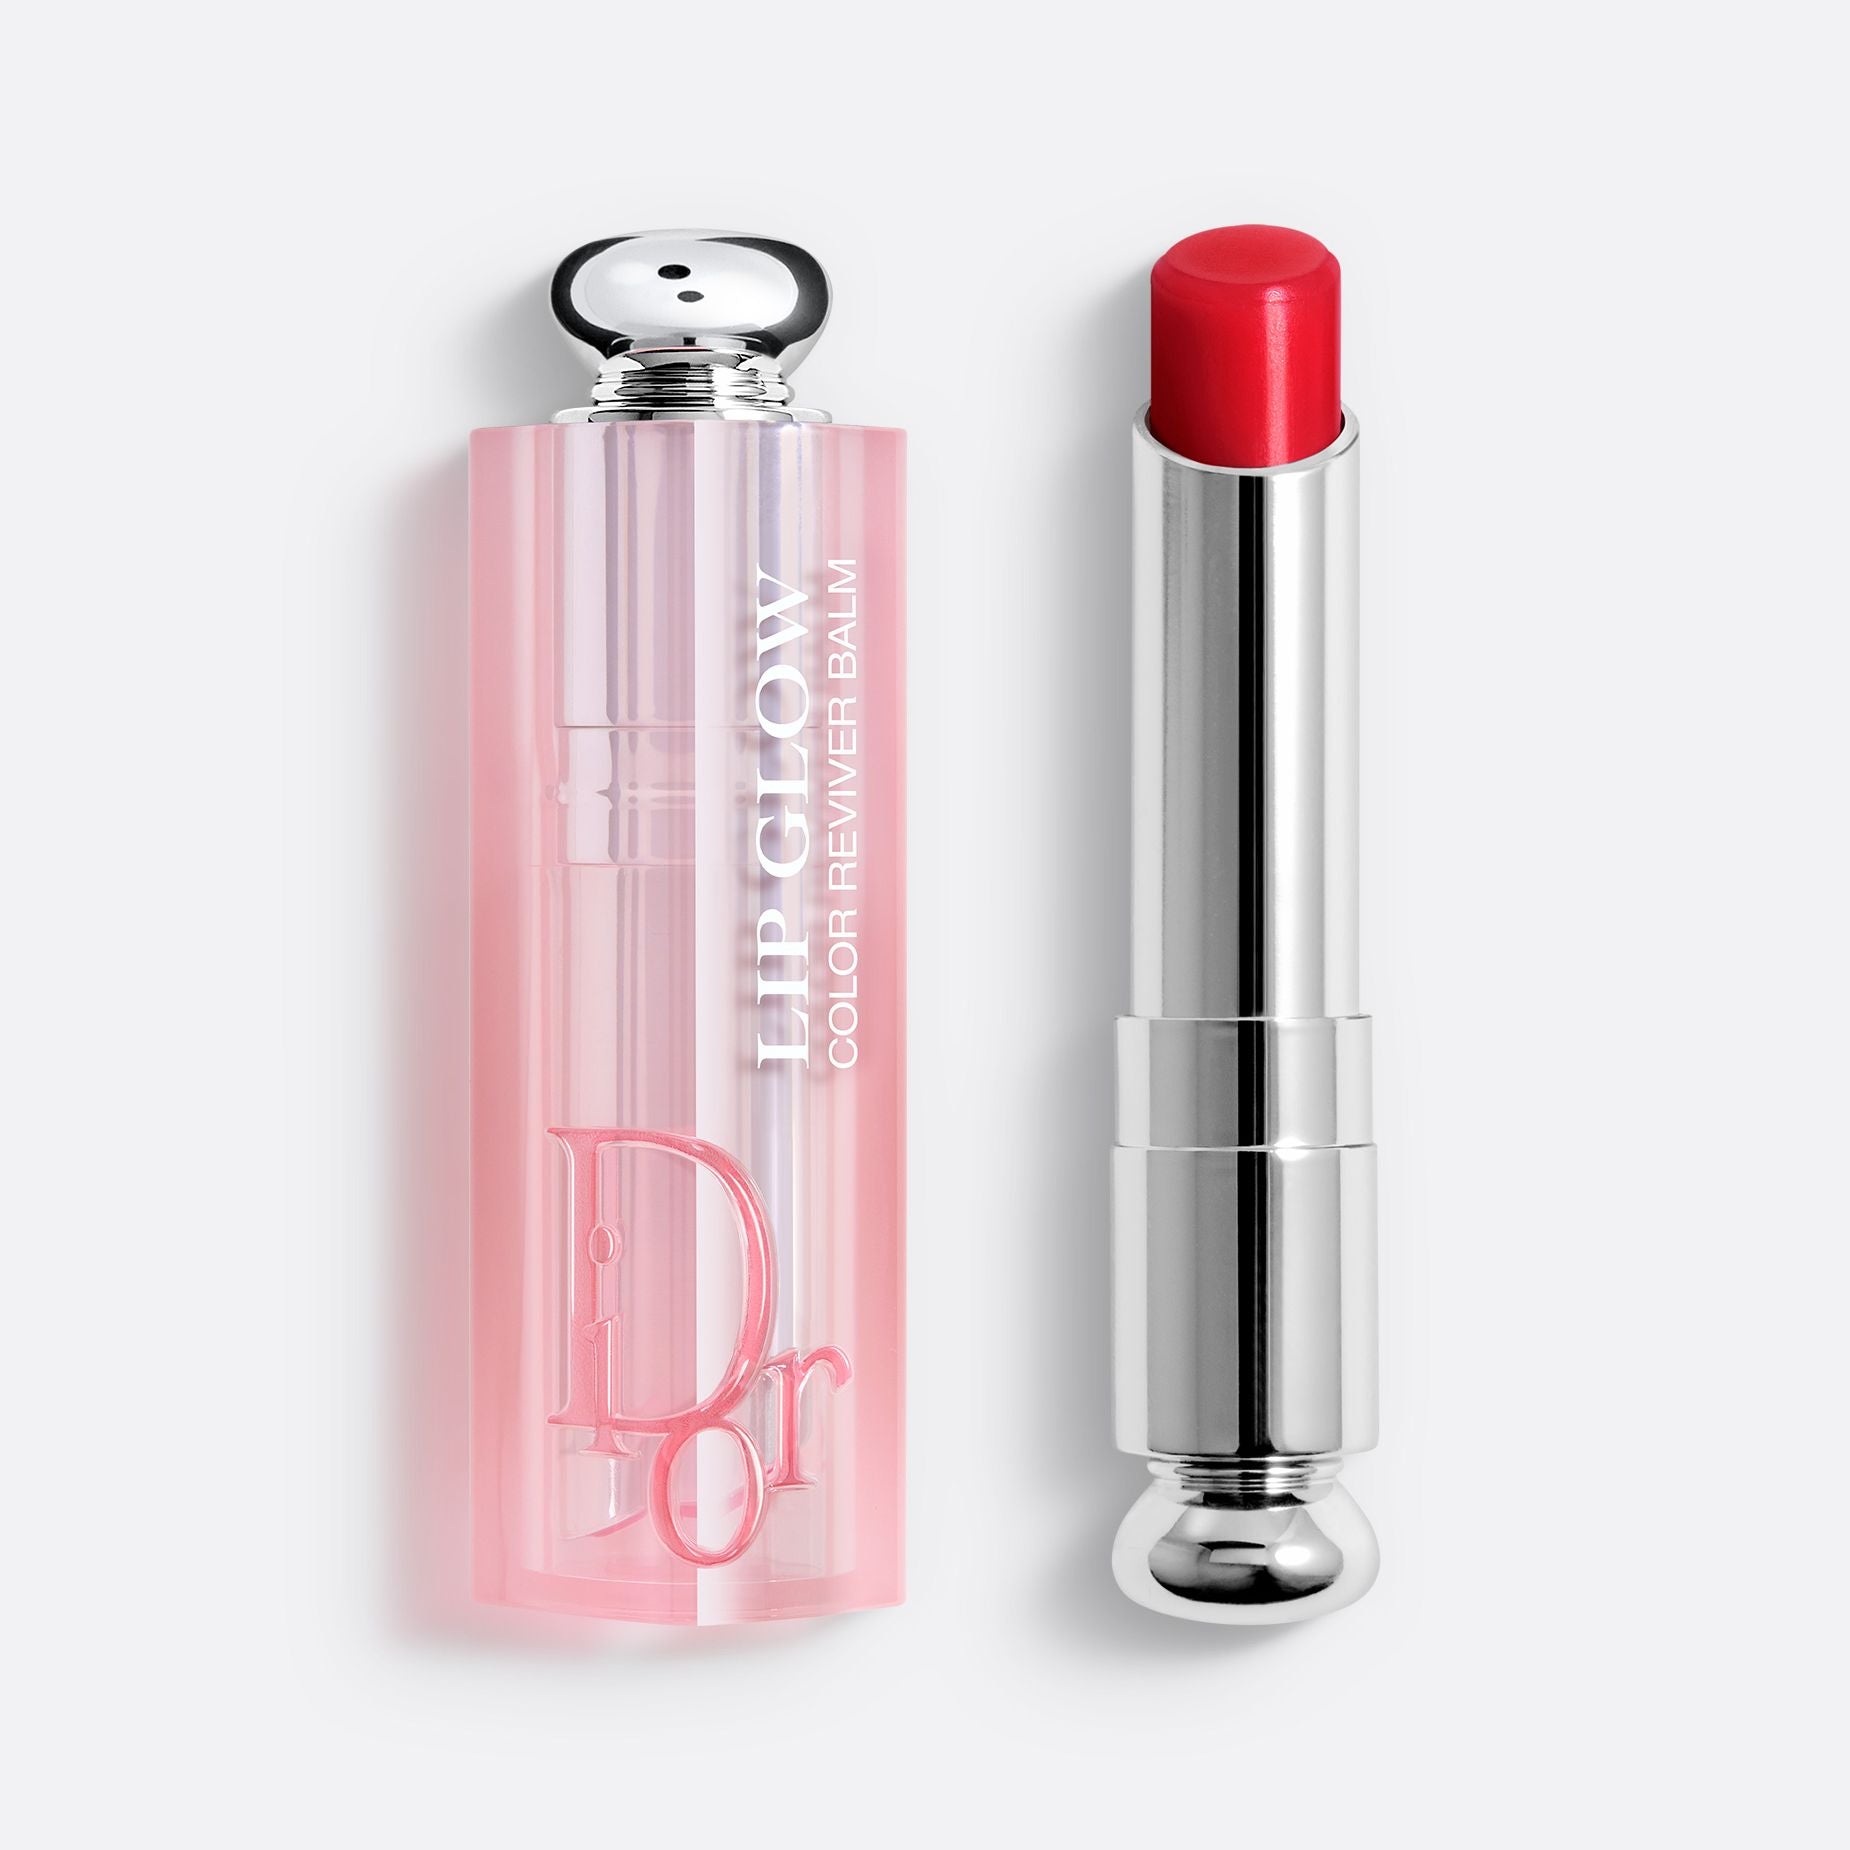 DIOR ADDICT LIP GLOW - BLOOMING BOUDOIR LIMITED EDITION  ~ Natural Glow Custom Color Reviving Lip Balm - 24h* Hydration - 97%** Natural-Origin Ingredients